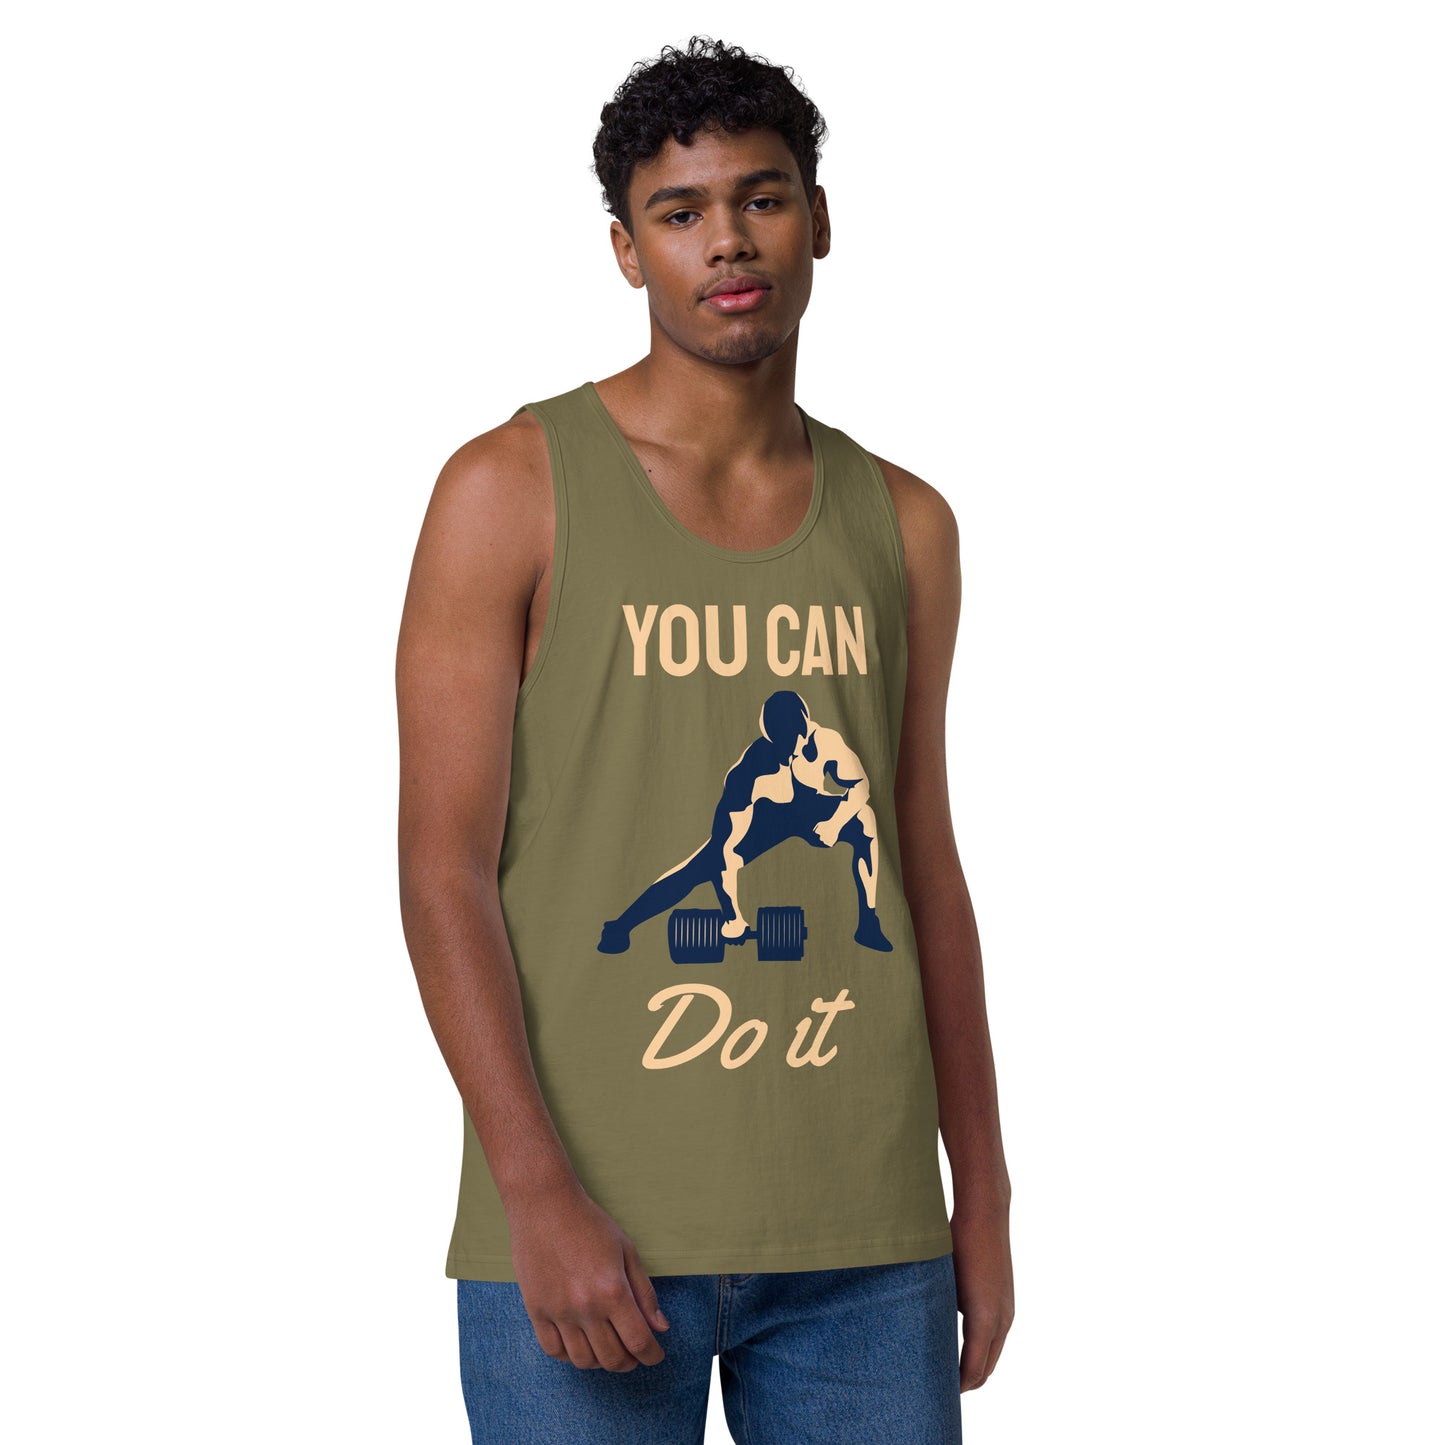 You can do it premium tank top - Military Green / S - Sport Finesse